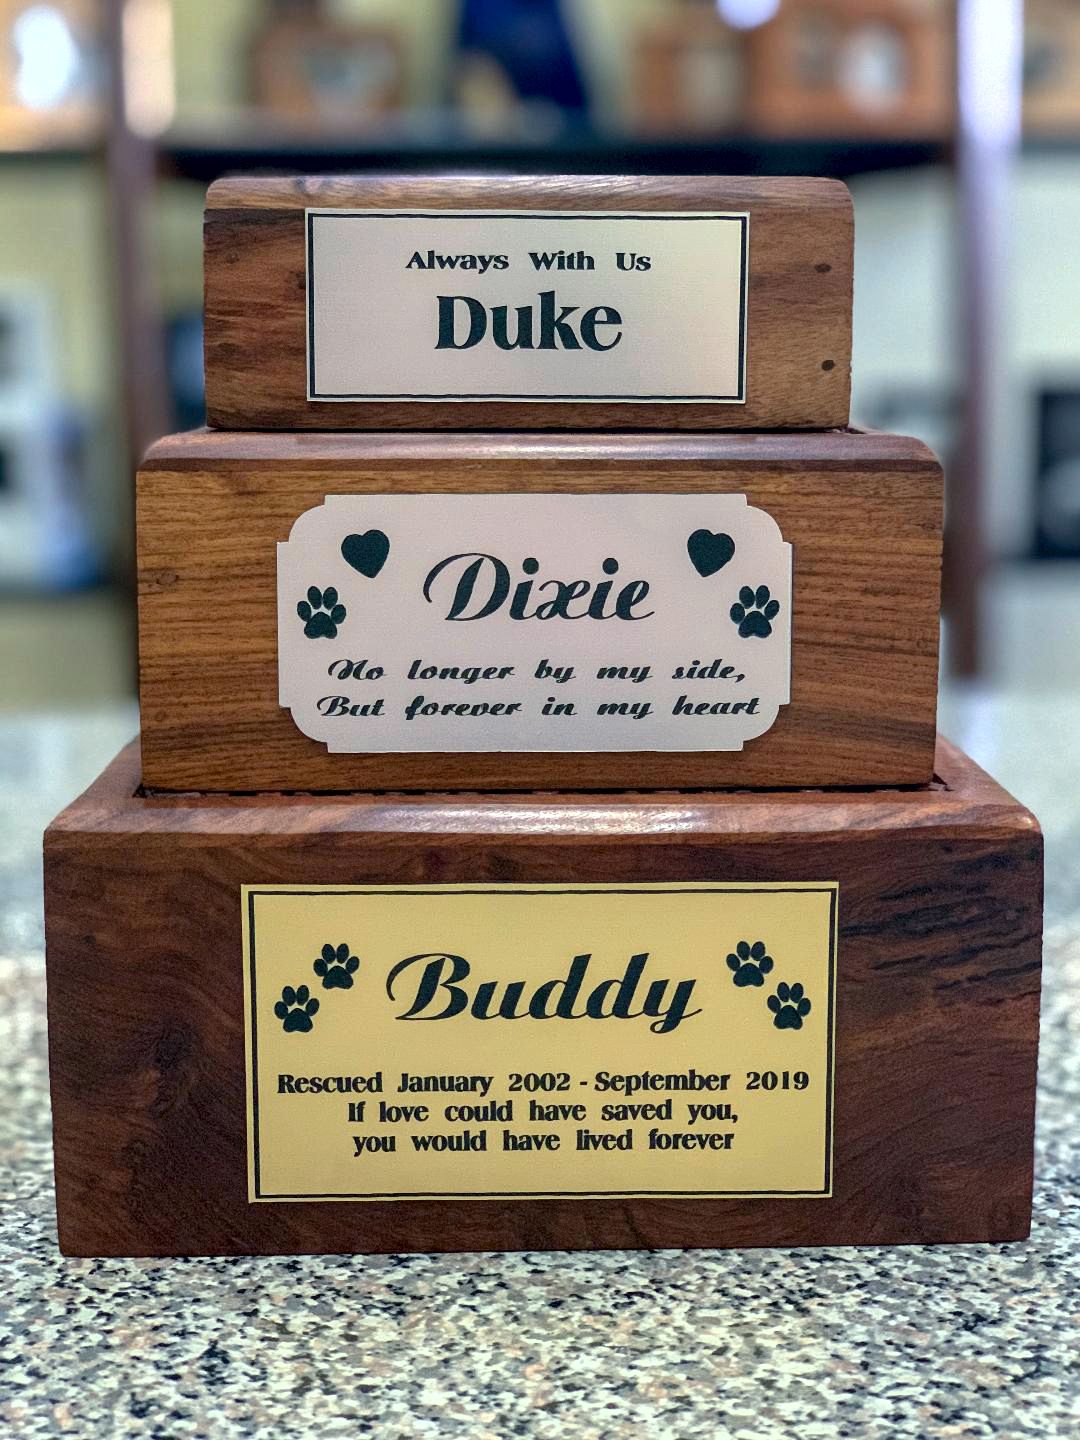 name plate for dog urn